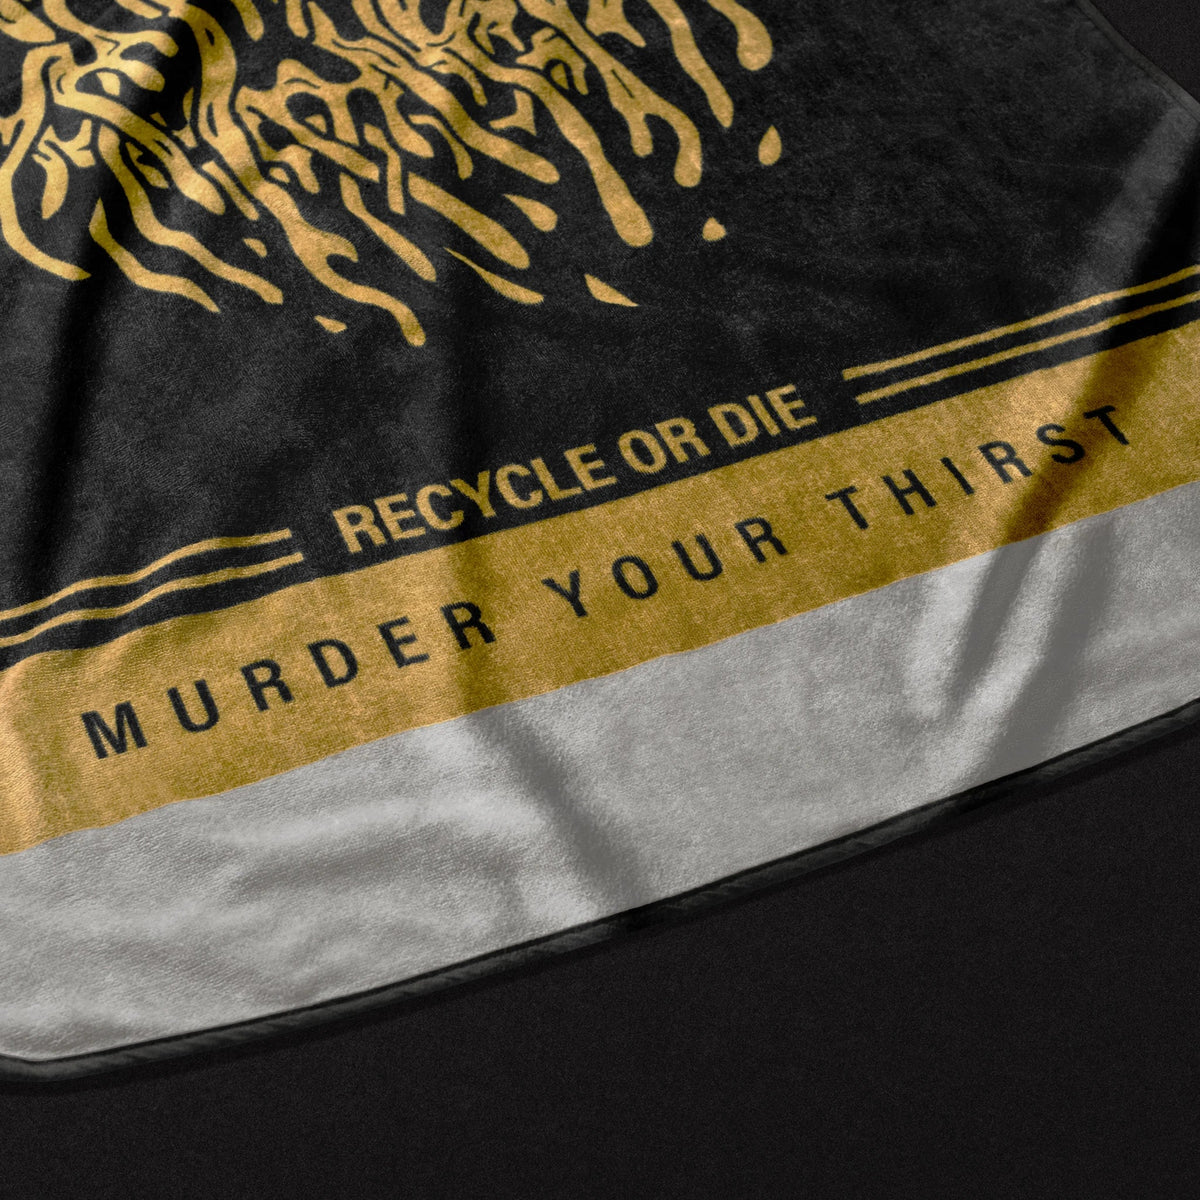 Laid To Rest Oversized Beach Towel - MHDC Giveaway